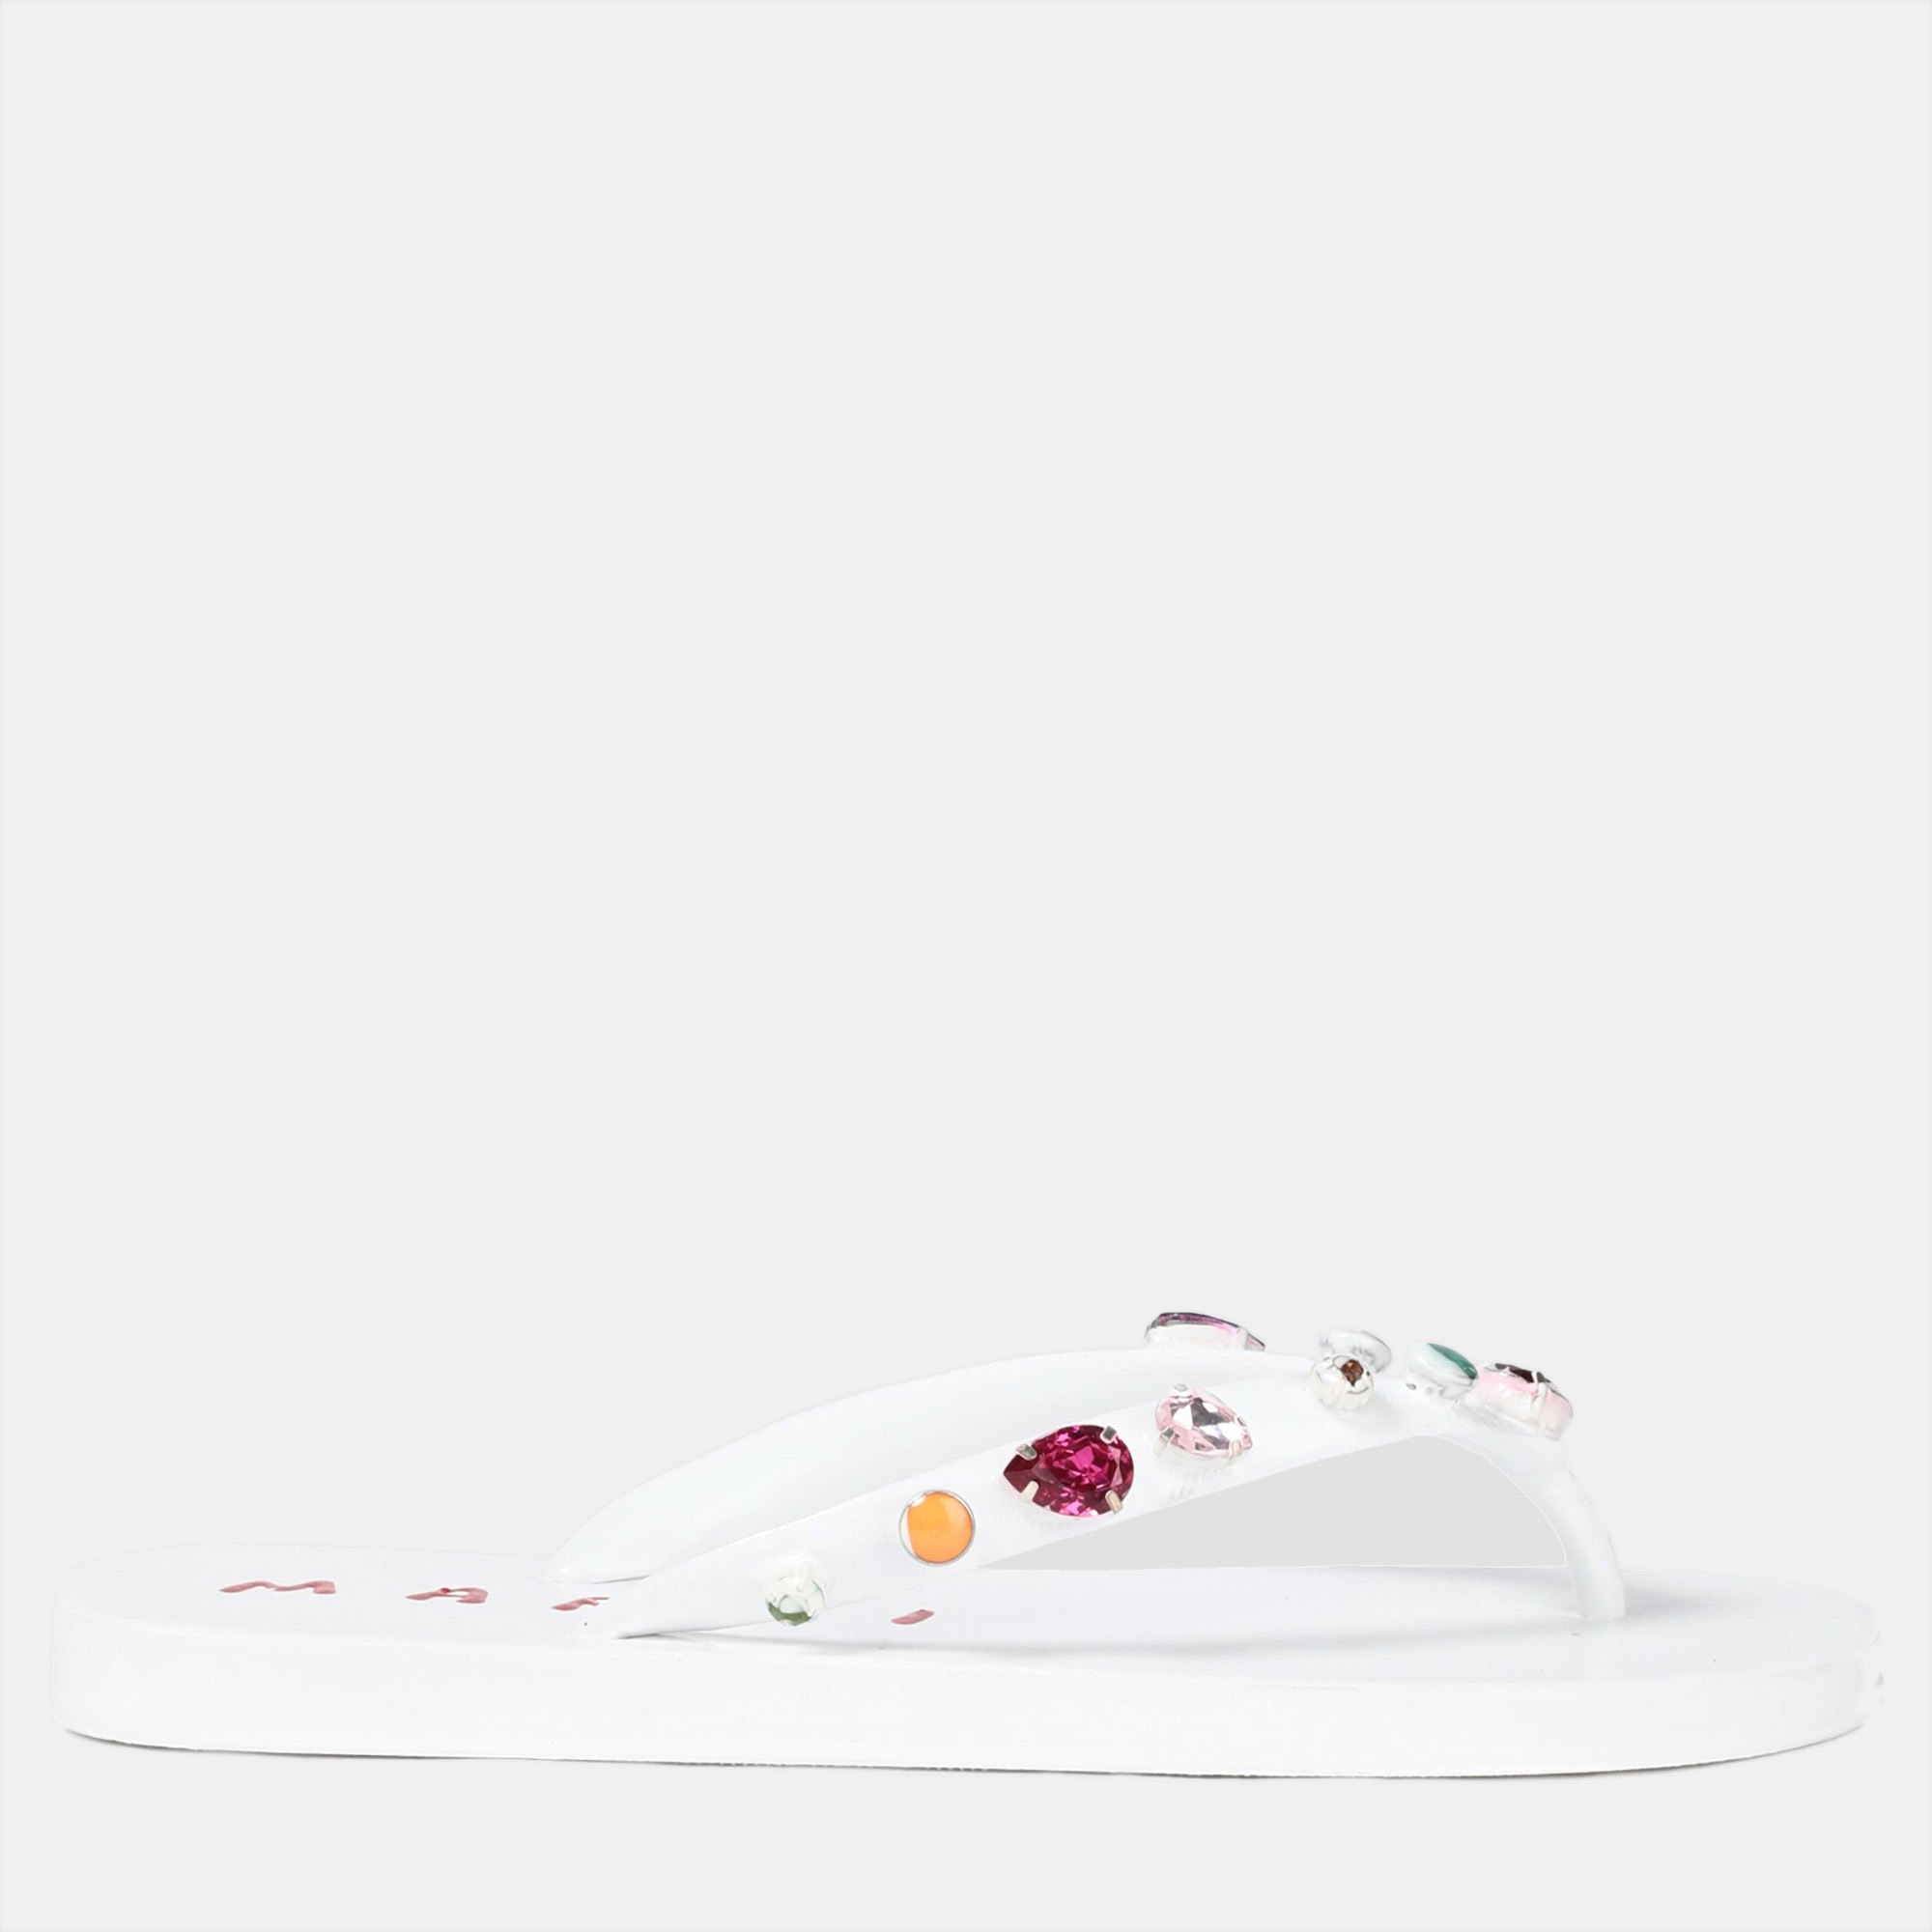 Marni rubber thong sandals 36